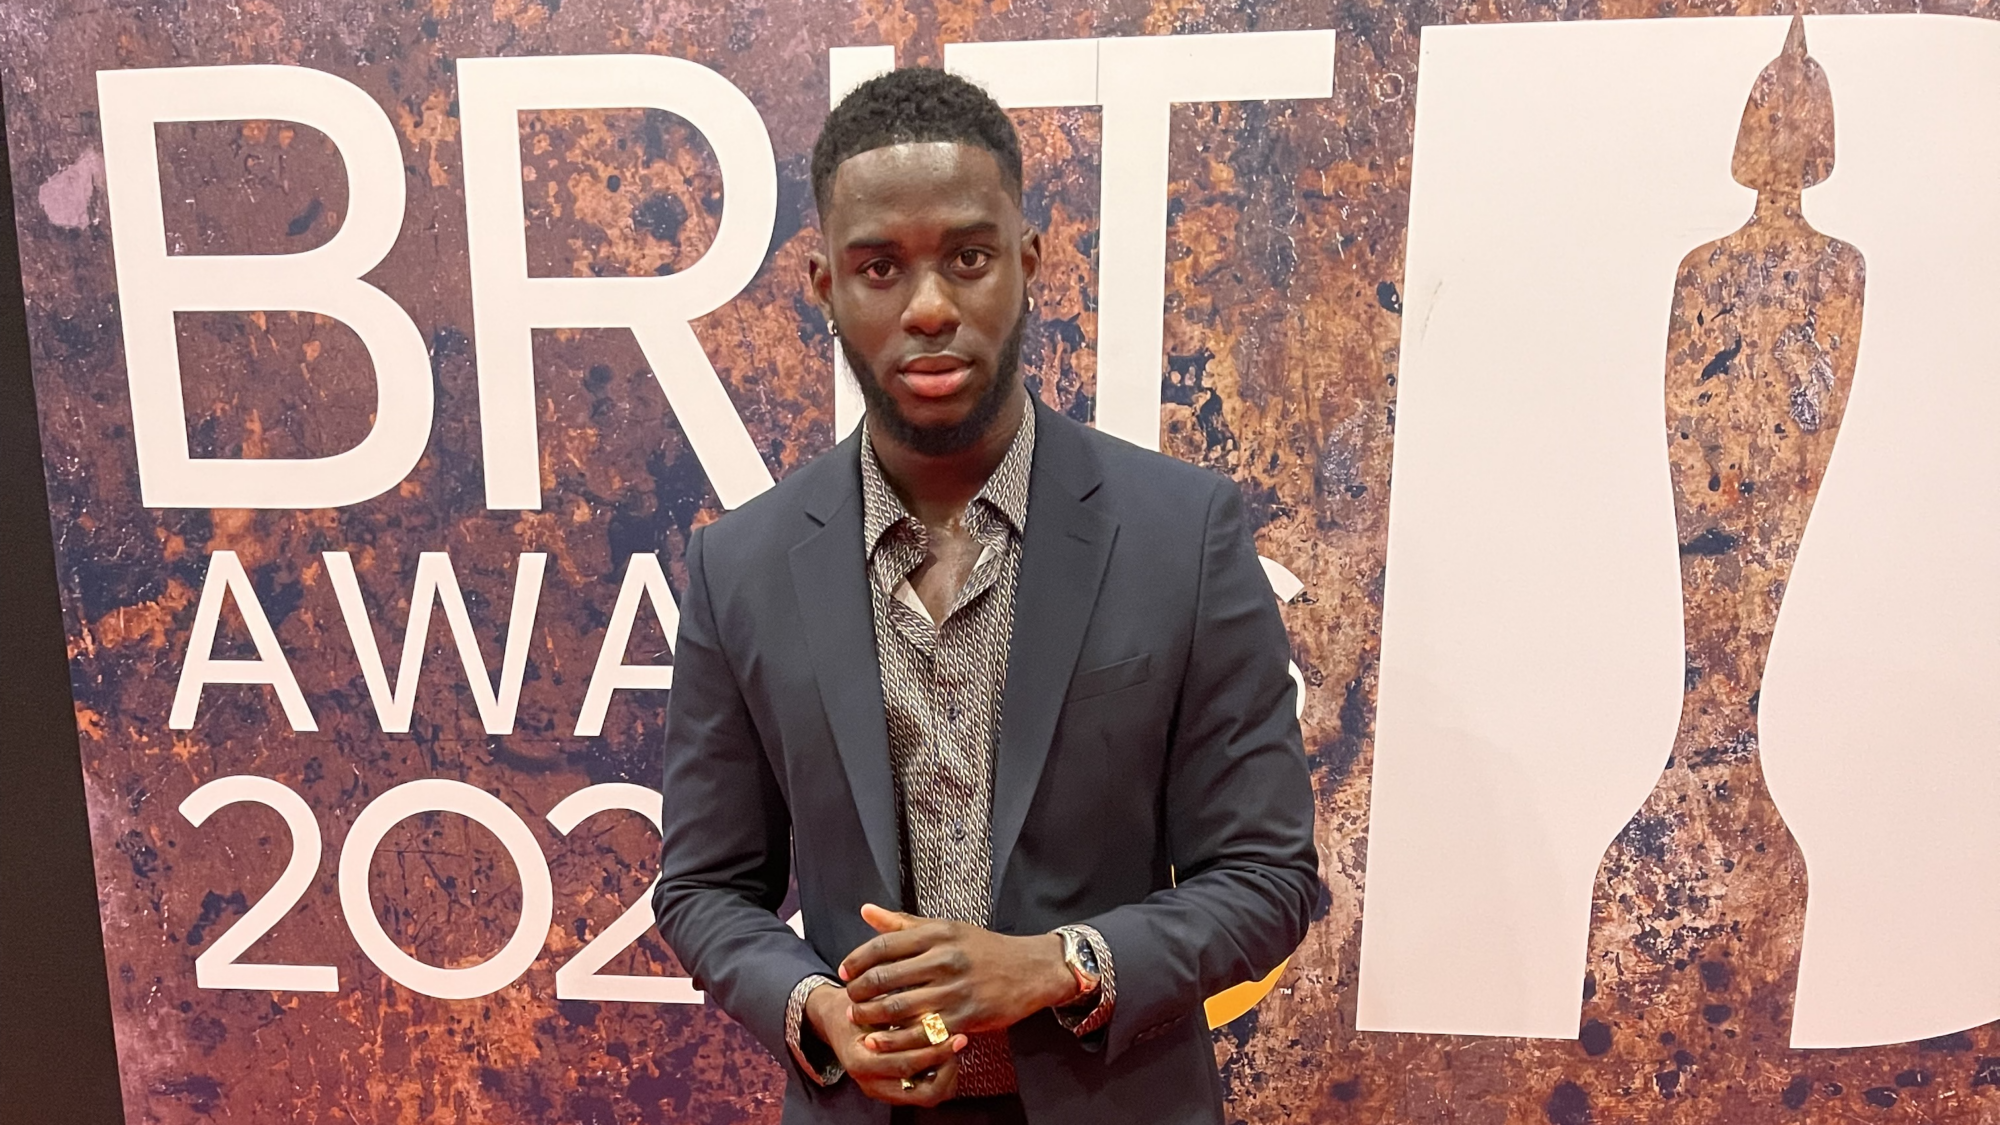 We called on stylist Tiyana Henriques to dress Moses LDN for The BRITS